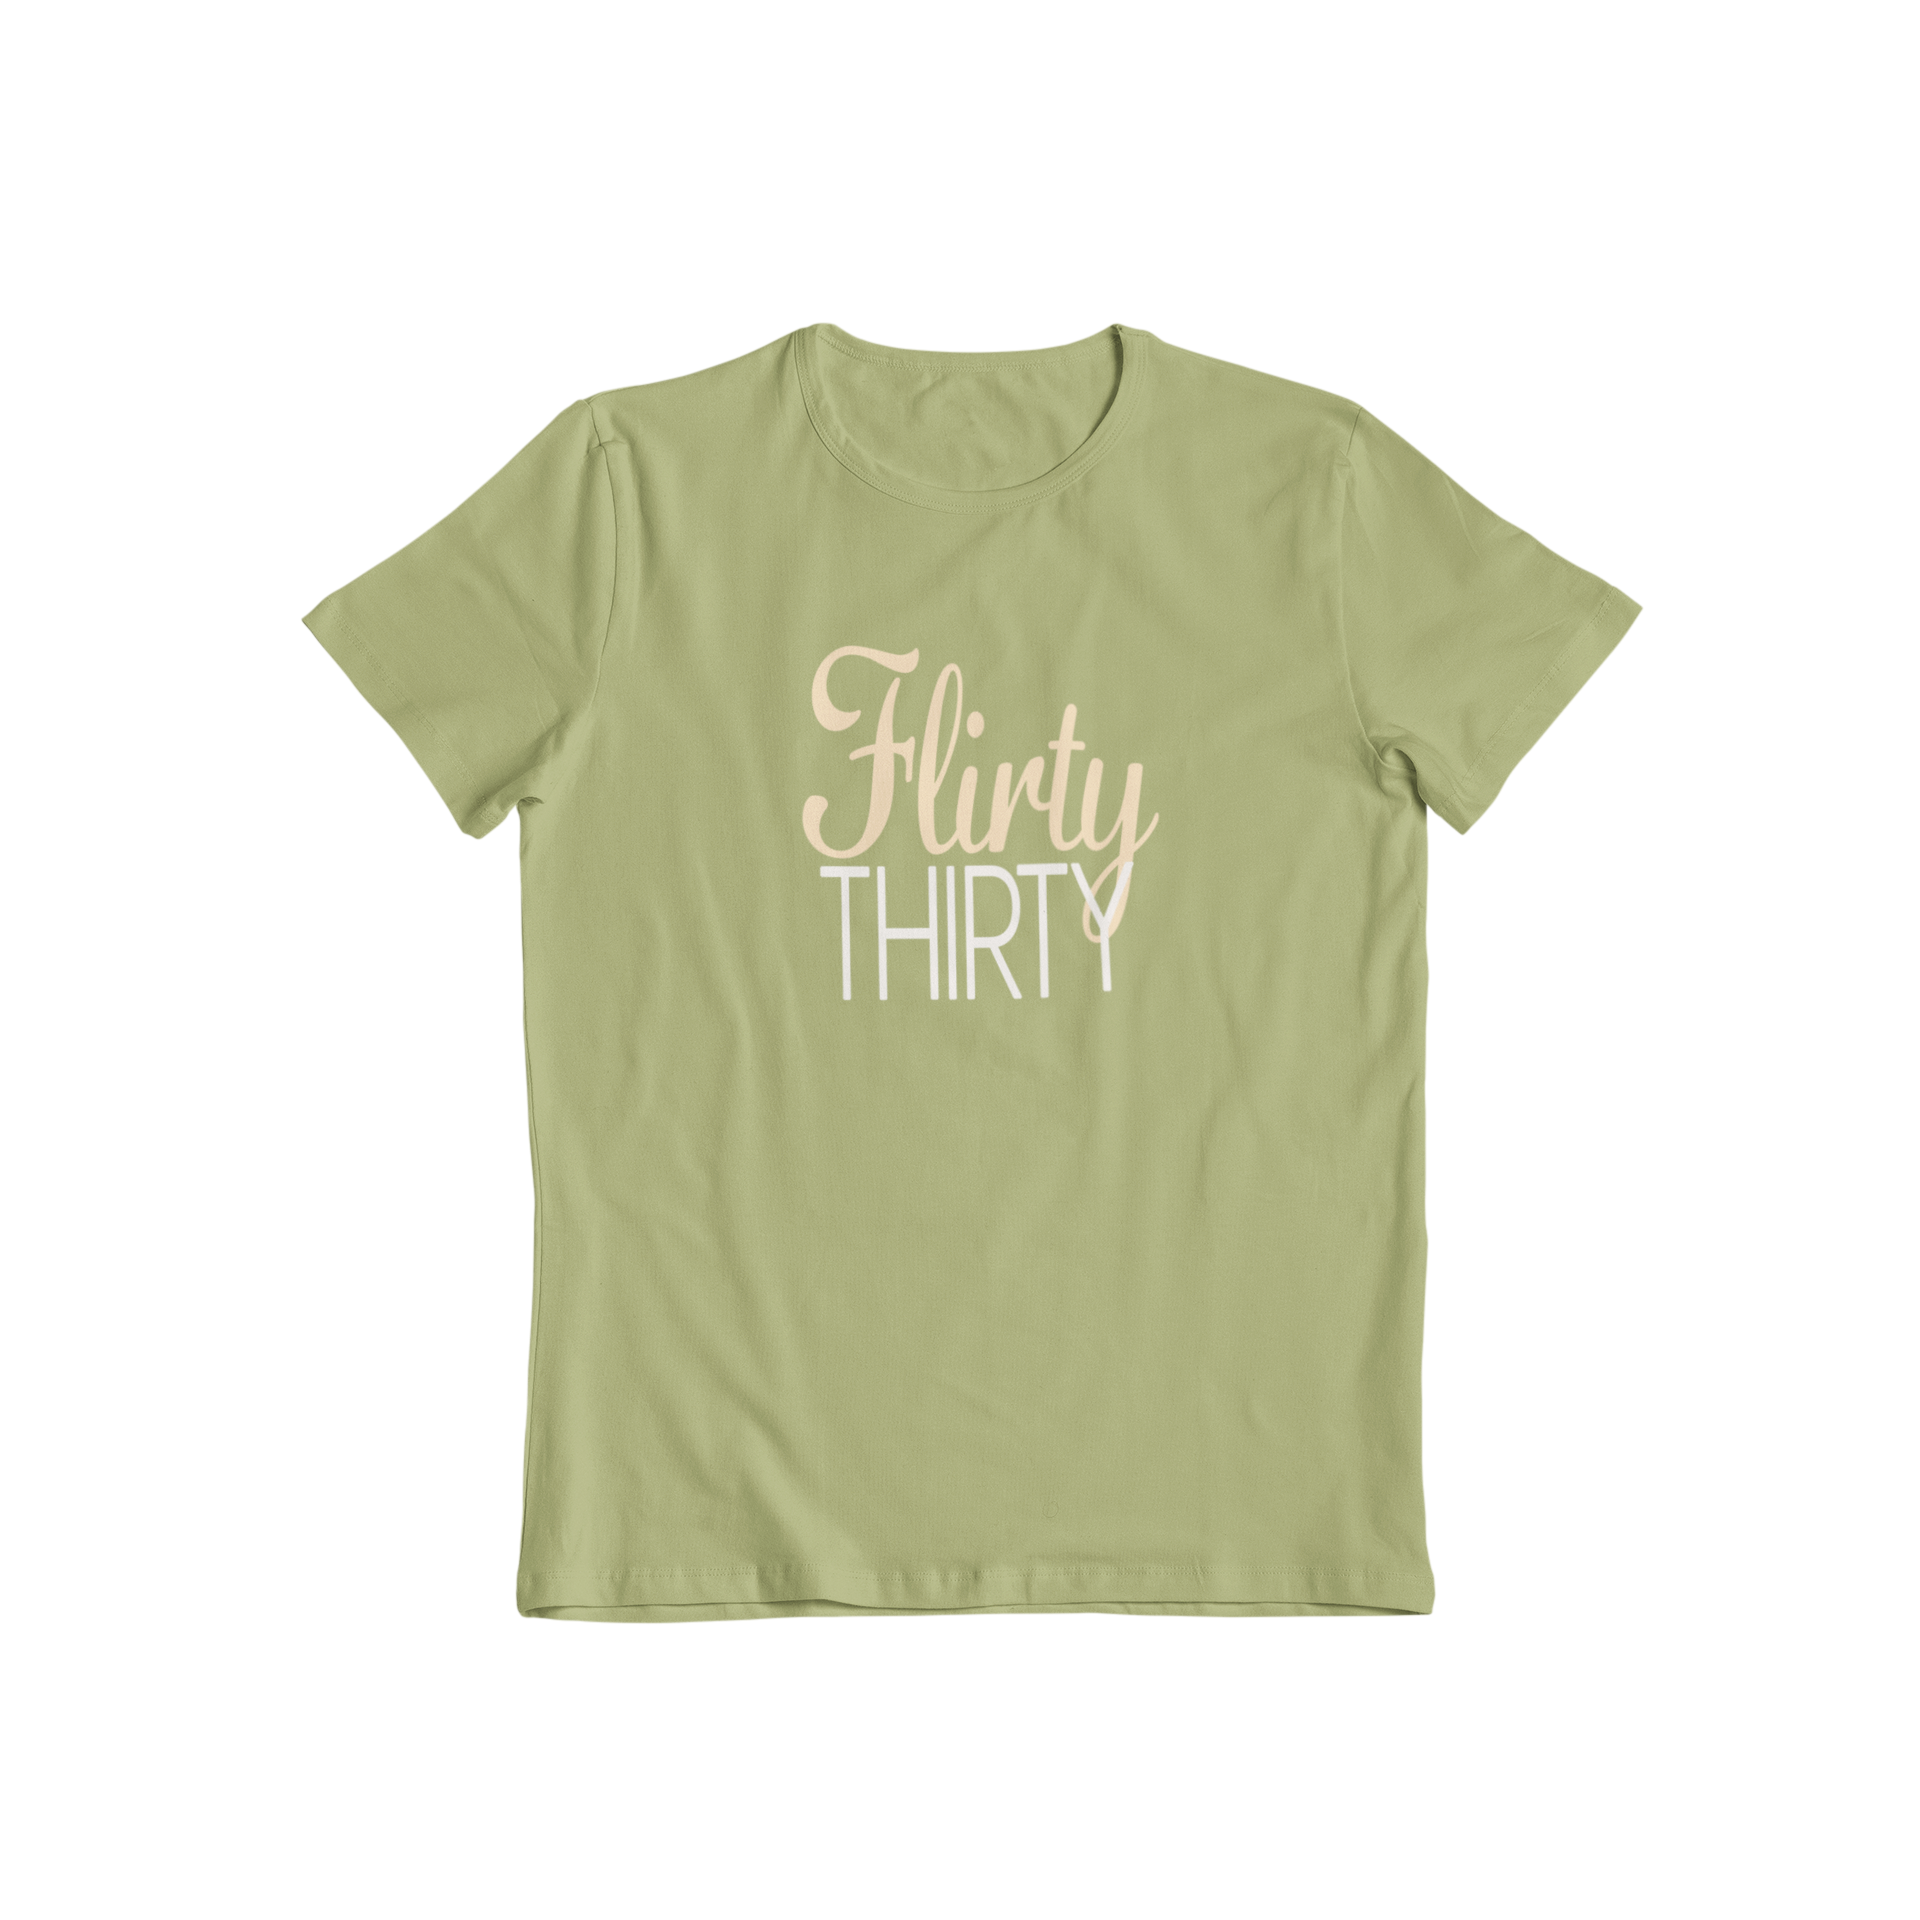 Are you looking for the perfect gift for someone who is turning 30? Look no further than Teevolution! Our Flirty Thirty t-shirt is a classic design that celebrates this milestone birthday in style. Get yours today and help make their day extra special.